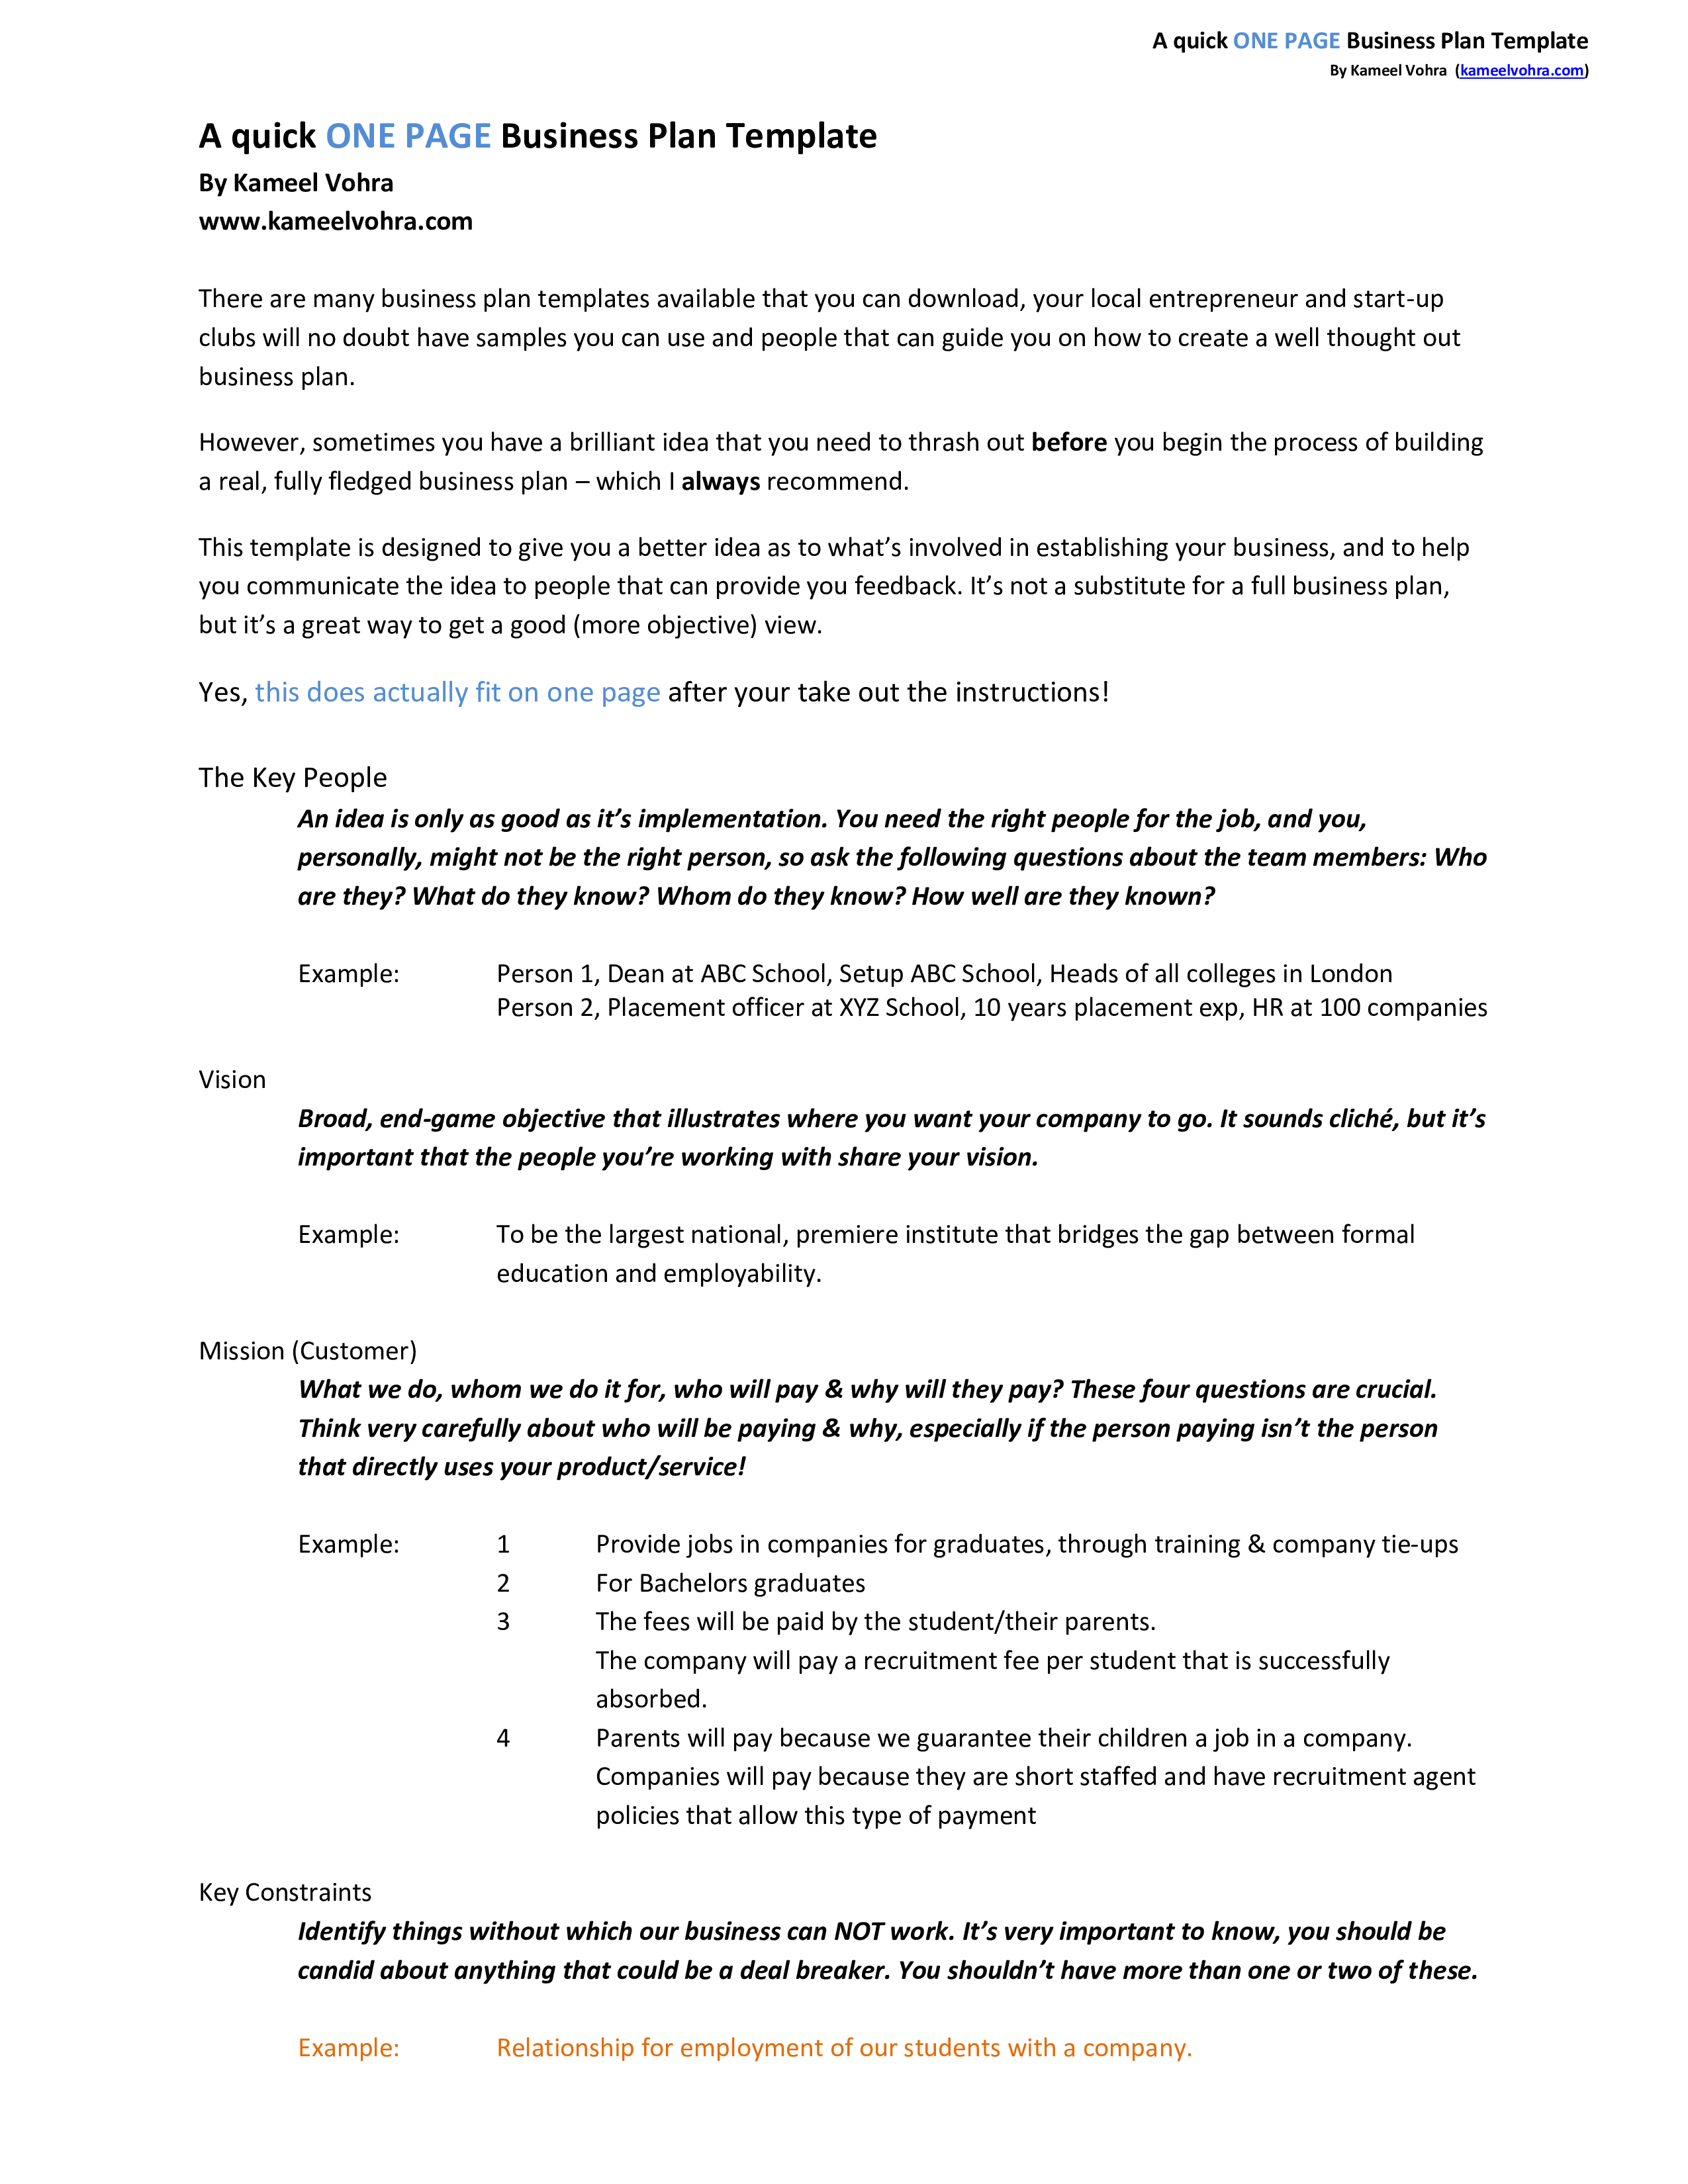 A Quick One Page Business Plan Template - Eloquens With One Page Business Summary Template